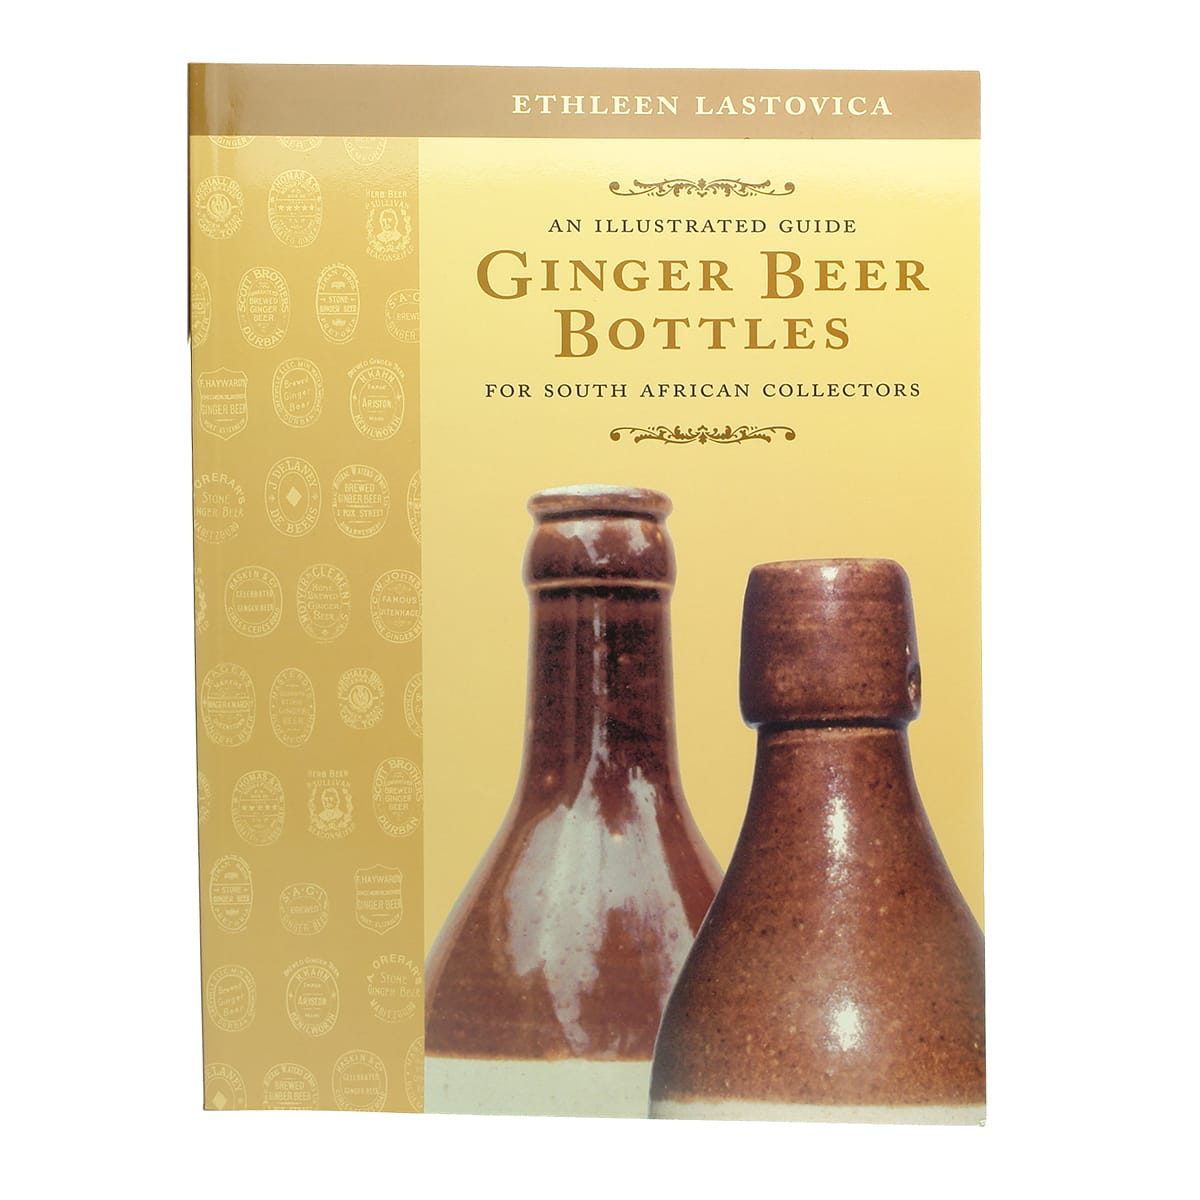 An Illustrated Guide, Ginger Beer Bottles for South African Collectors, by Ethleen Lastovica.